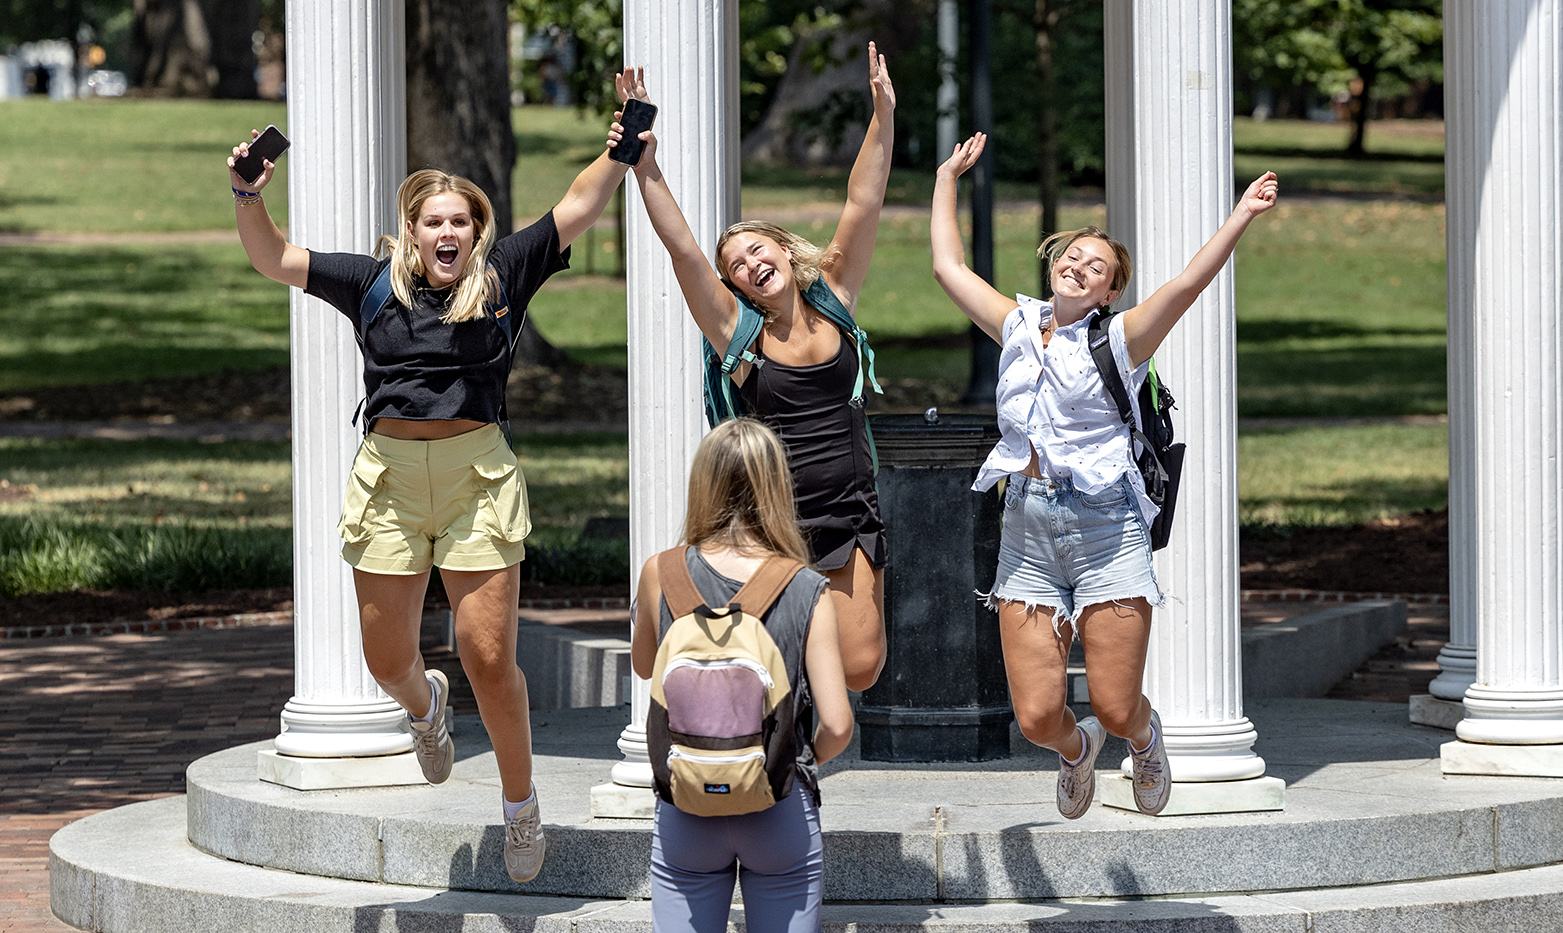 Three students jumping simultaneously while getting their picture taken in front of the Old Well on the campus of UNC-Chapel Hill.